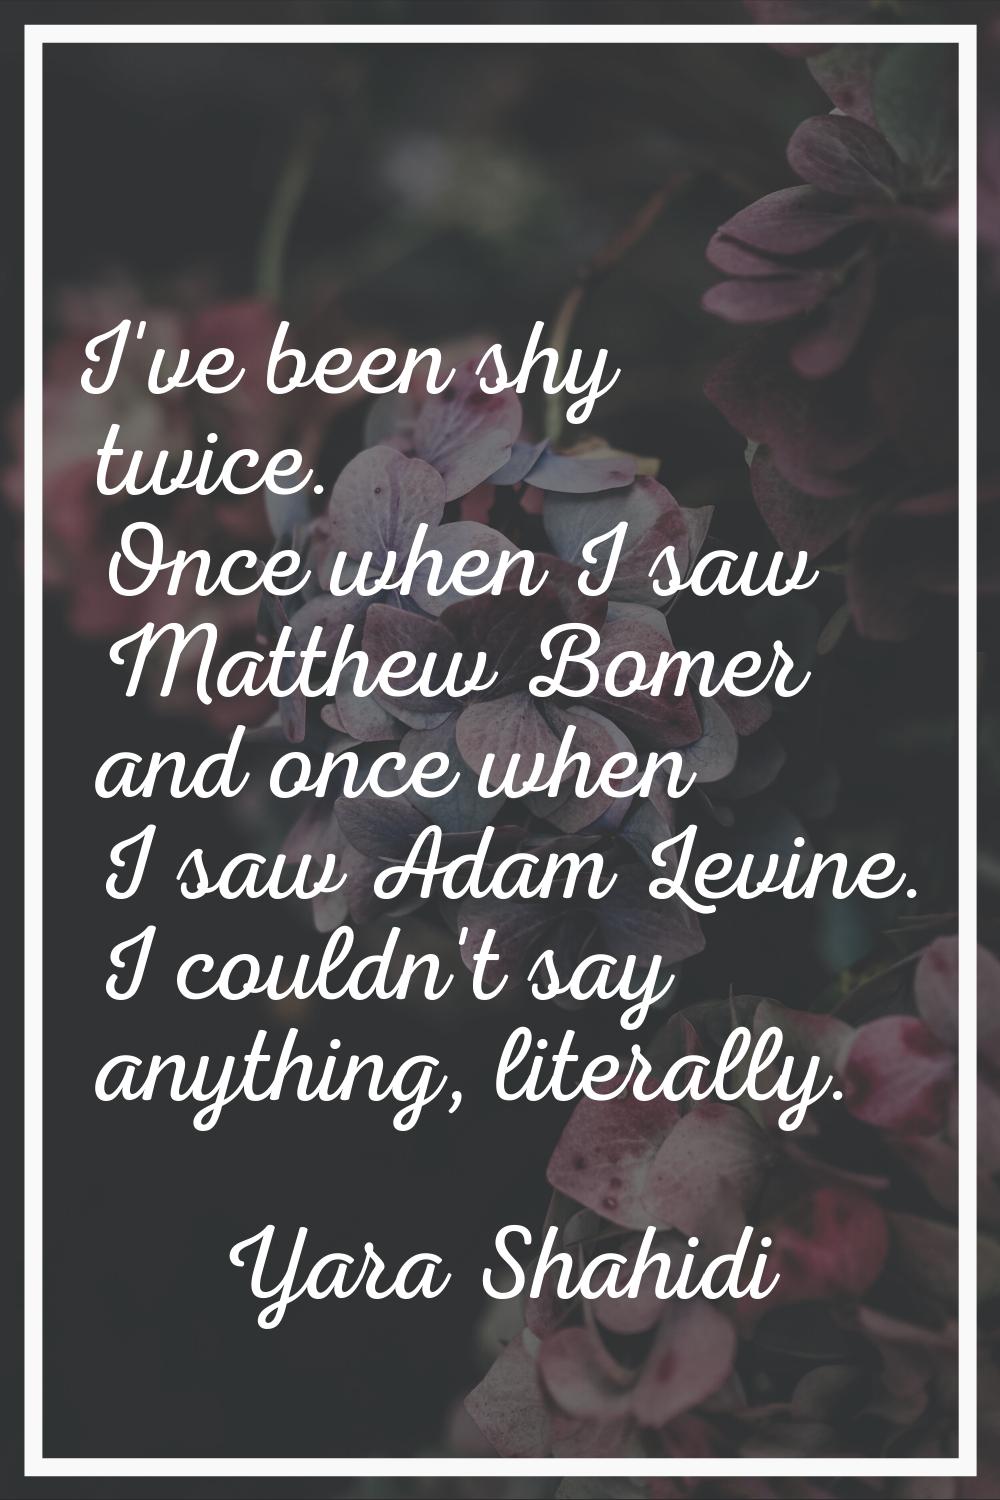 I've been shy twice. Once when I saw Matthew Bomer and once when I saw Adam Levine. I couldn't say 